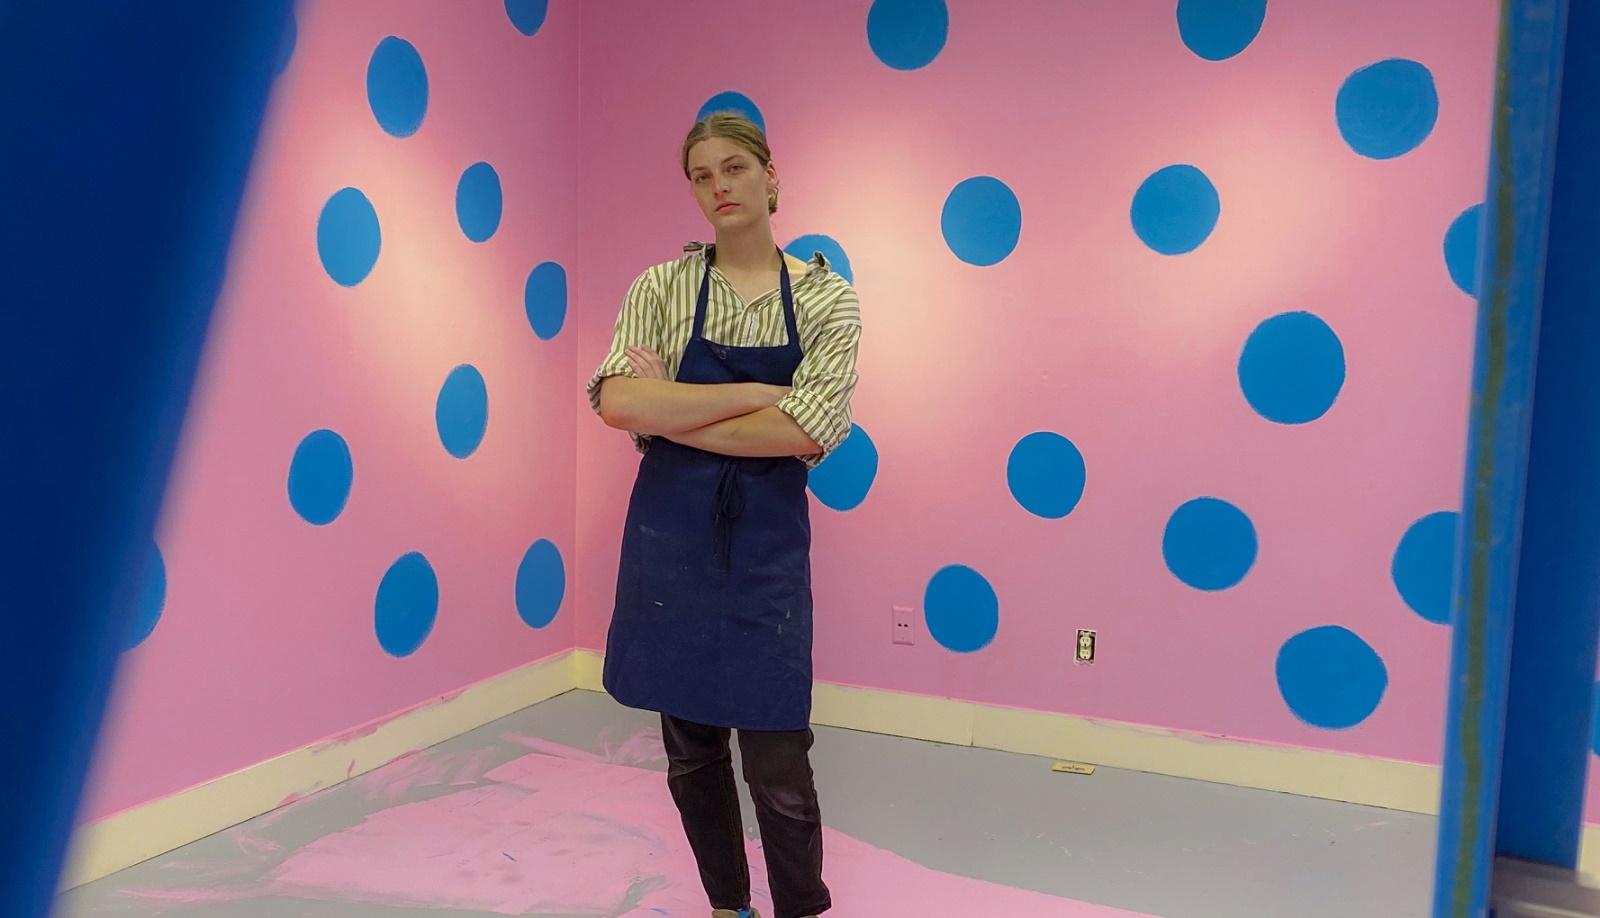 Charlie Wetzel poses for a photo in the middle of a pink and blue art installation.